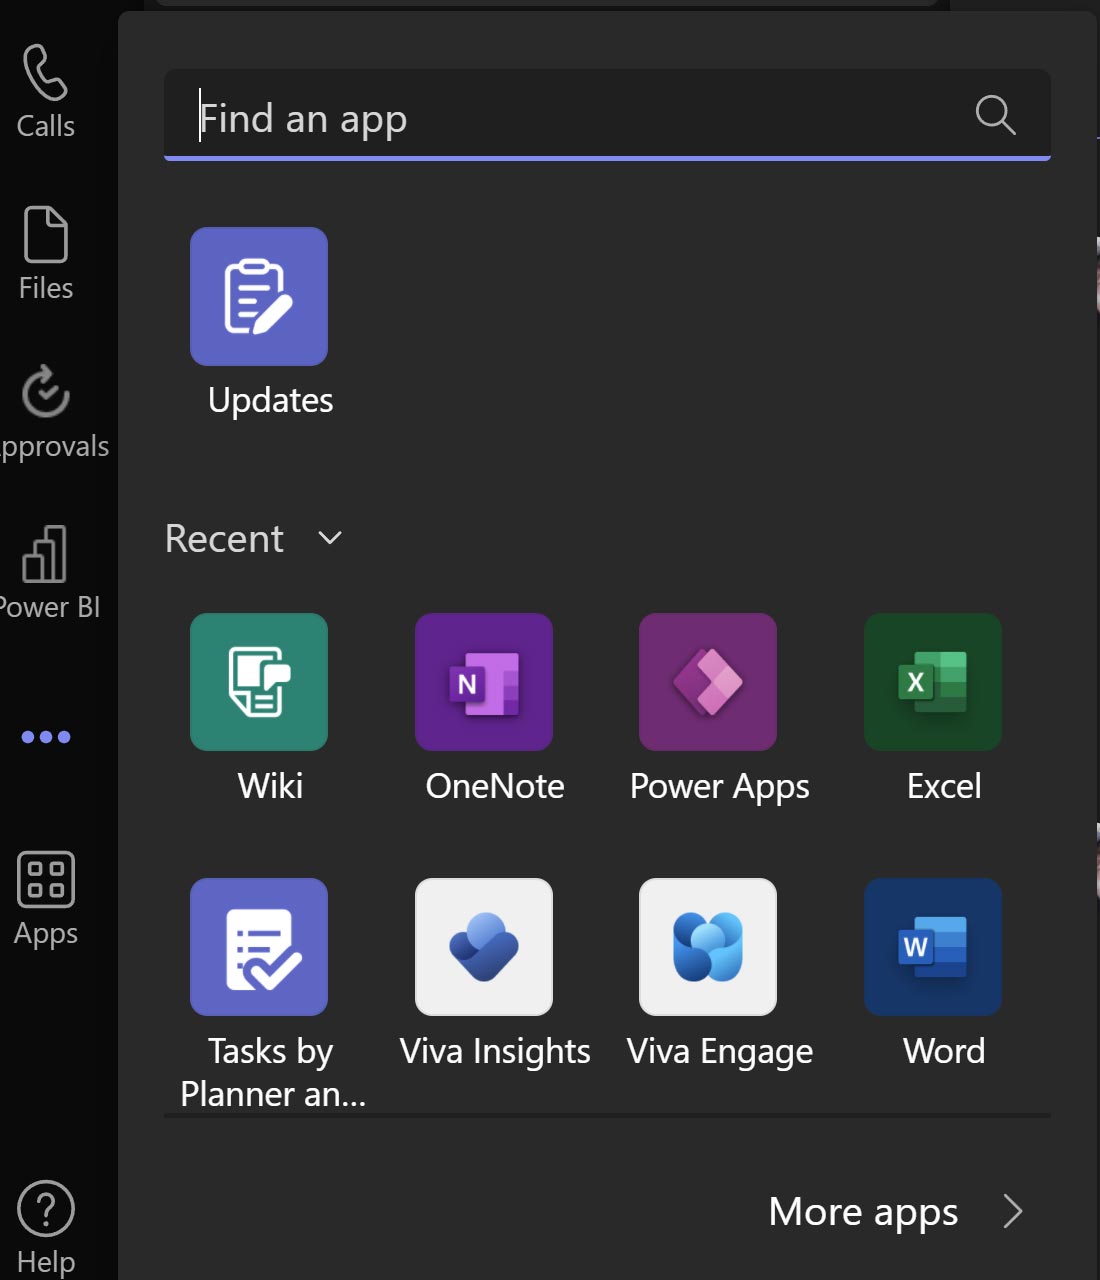 Clicking "more apps" from Microsoft Teams navigation